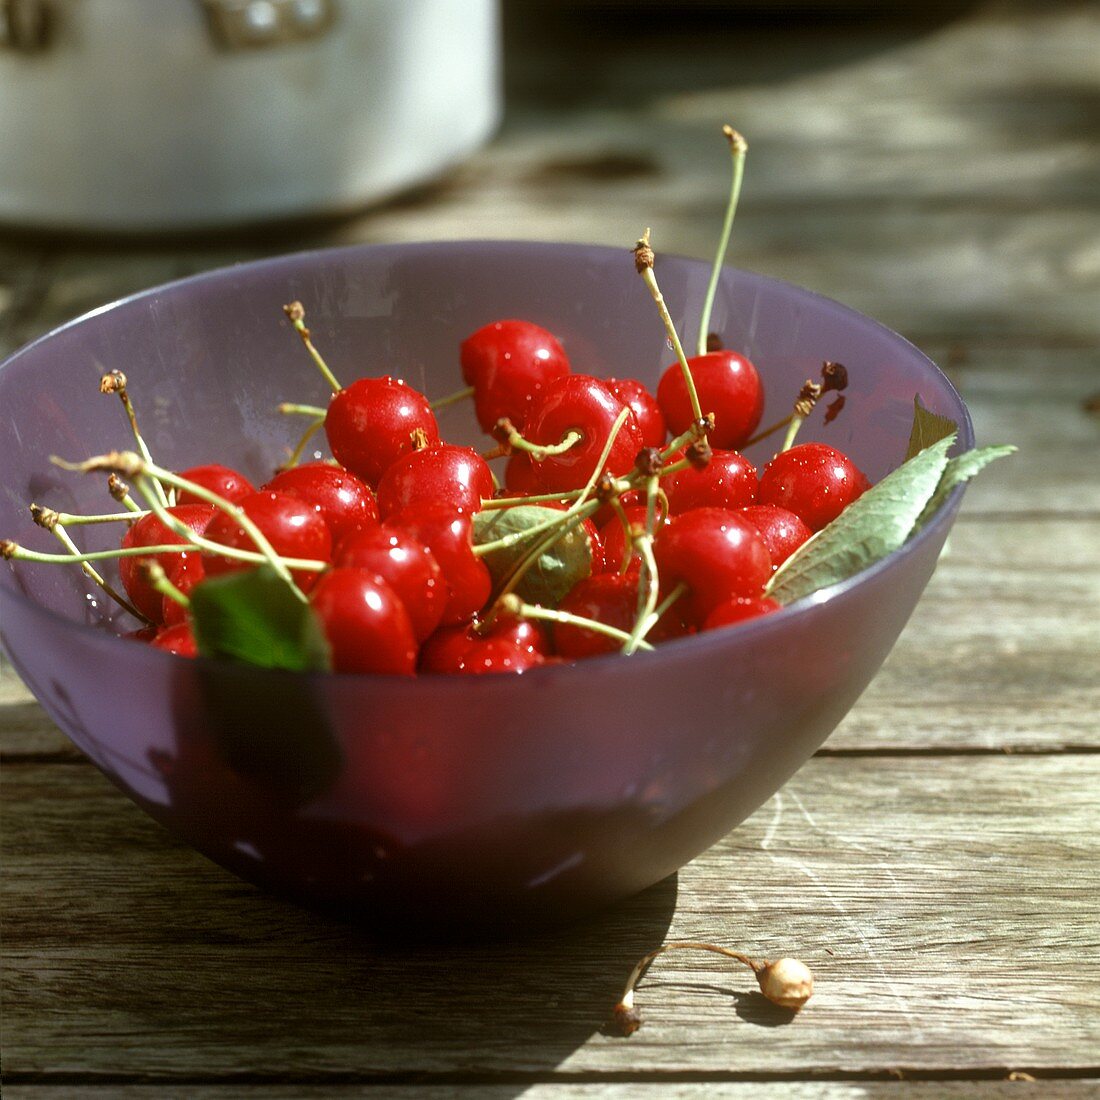 Sour cherries with leaves in purple bowl